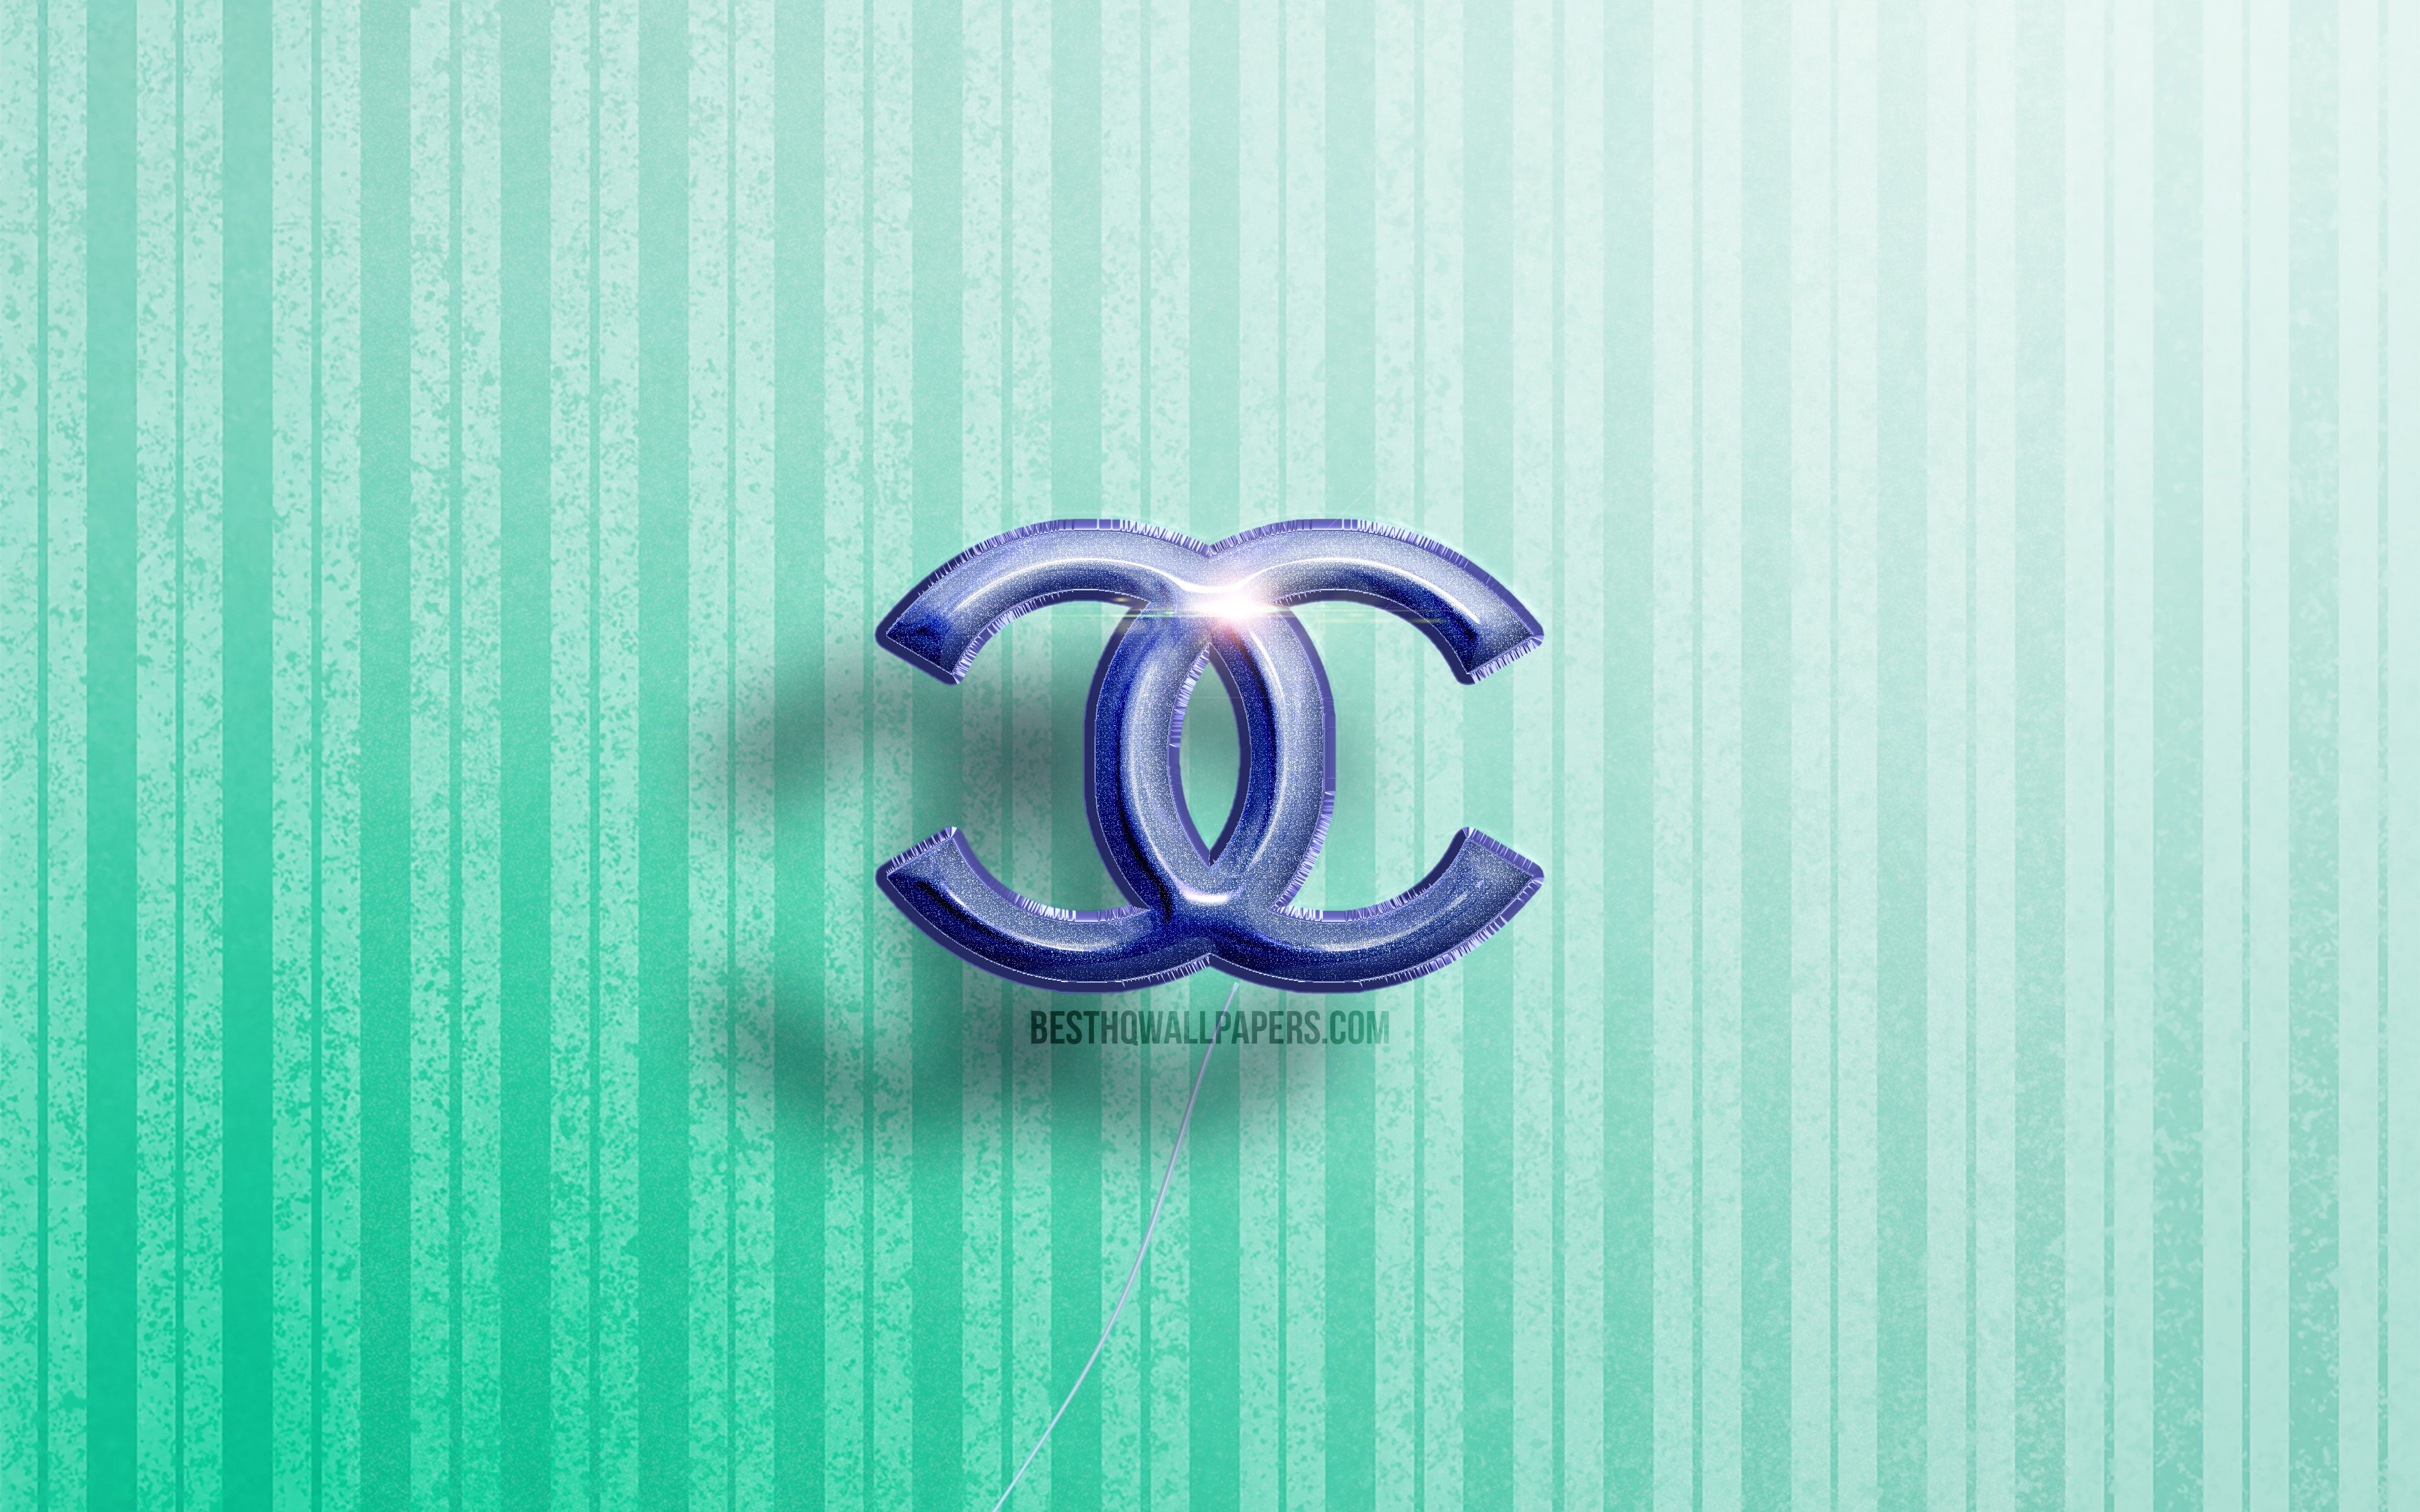 Download wallpaper 4k, Chanel 3D logo, blue realistic balloons, fashion brands, Chanel logo, blue wooden background, Chanel for desktop with resolution 3840x2400. High Quality HD picture wallpaper